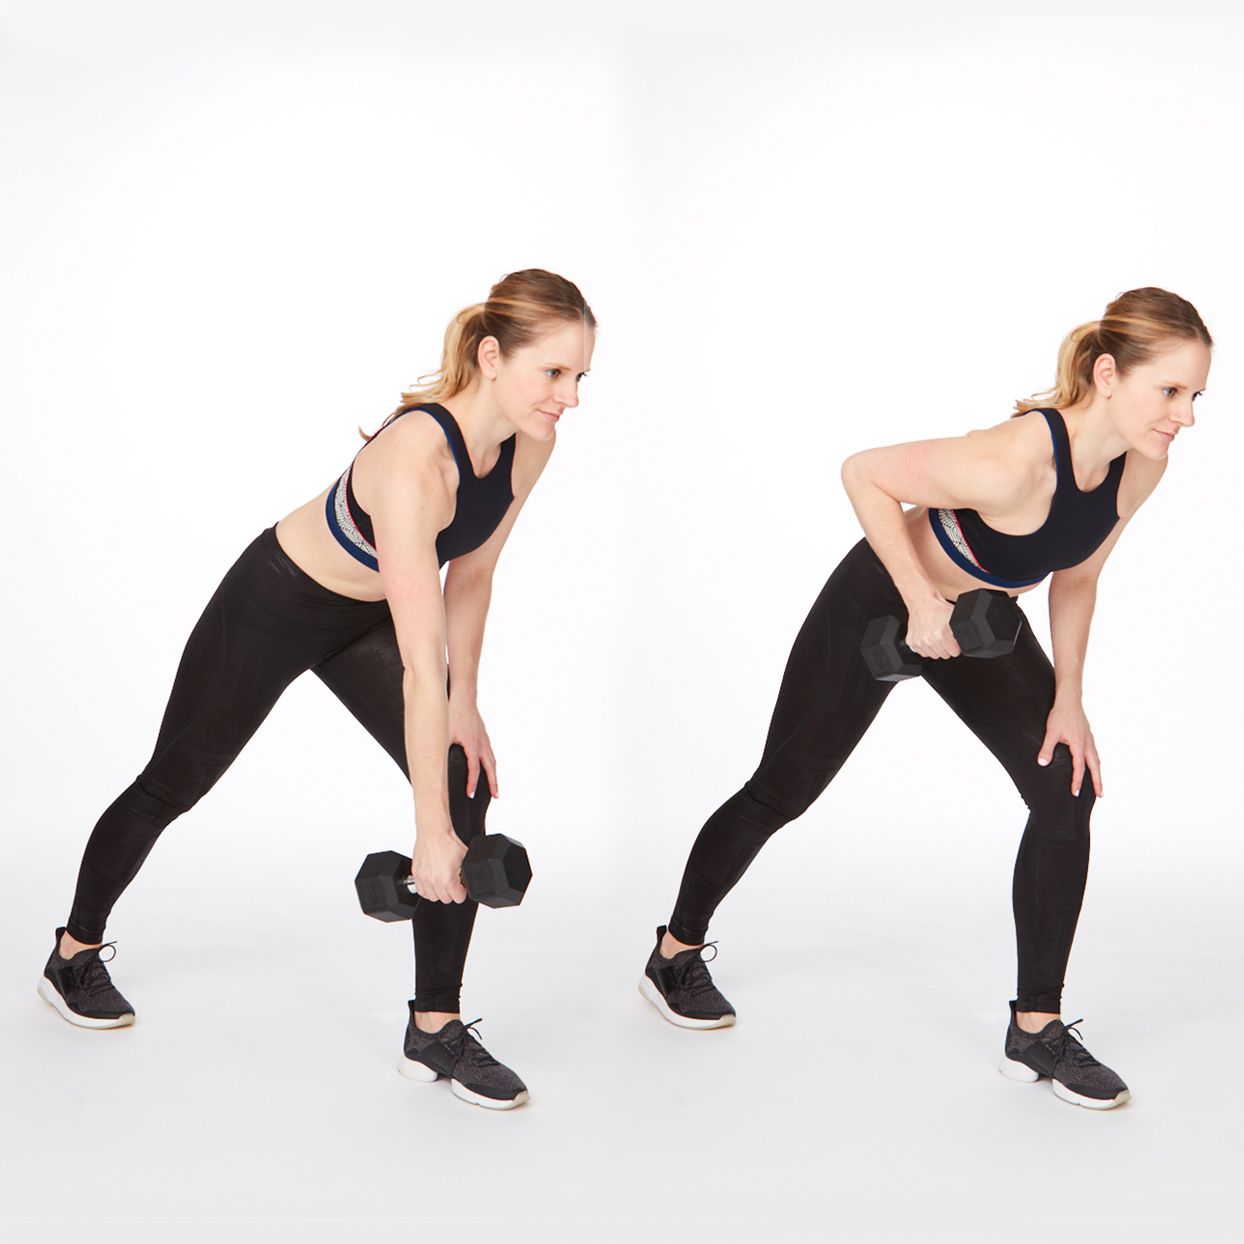 Dumbell row in a lunge position